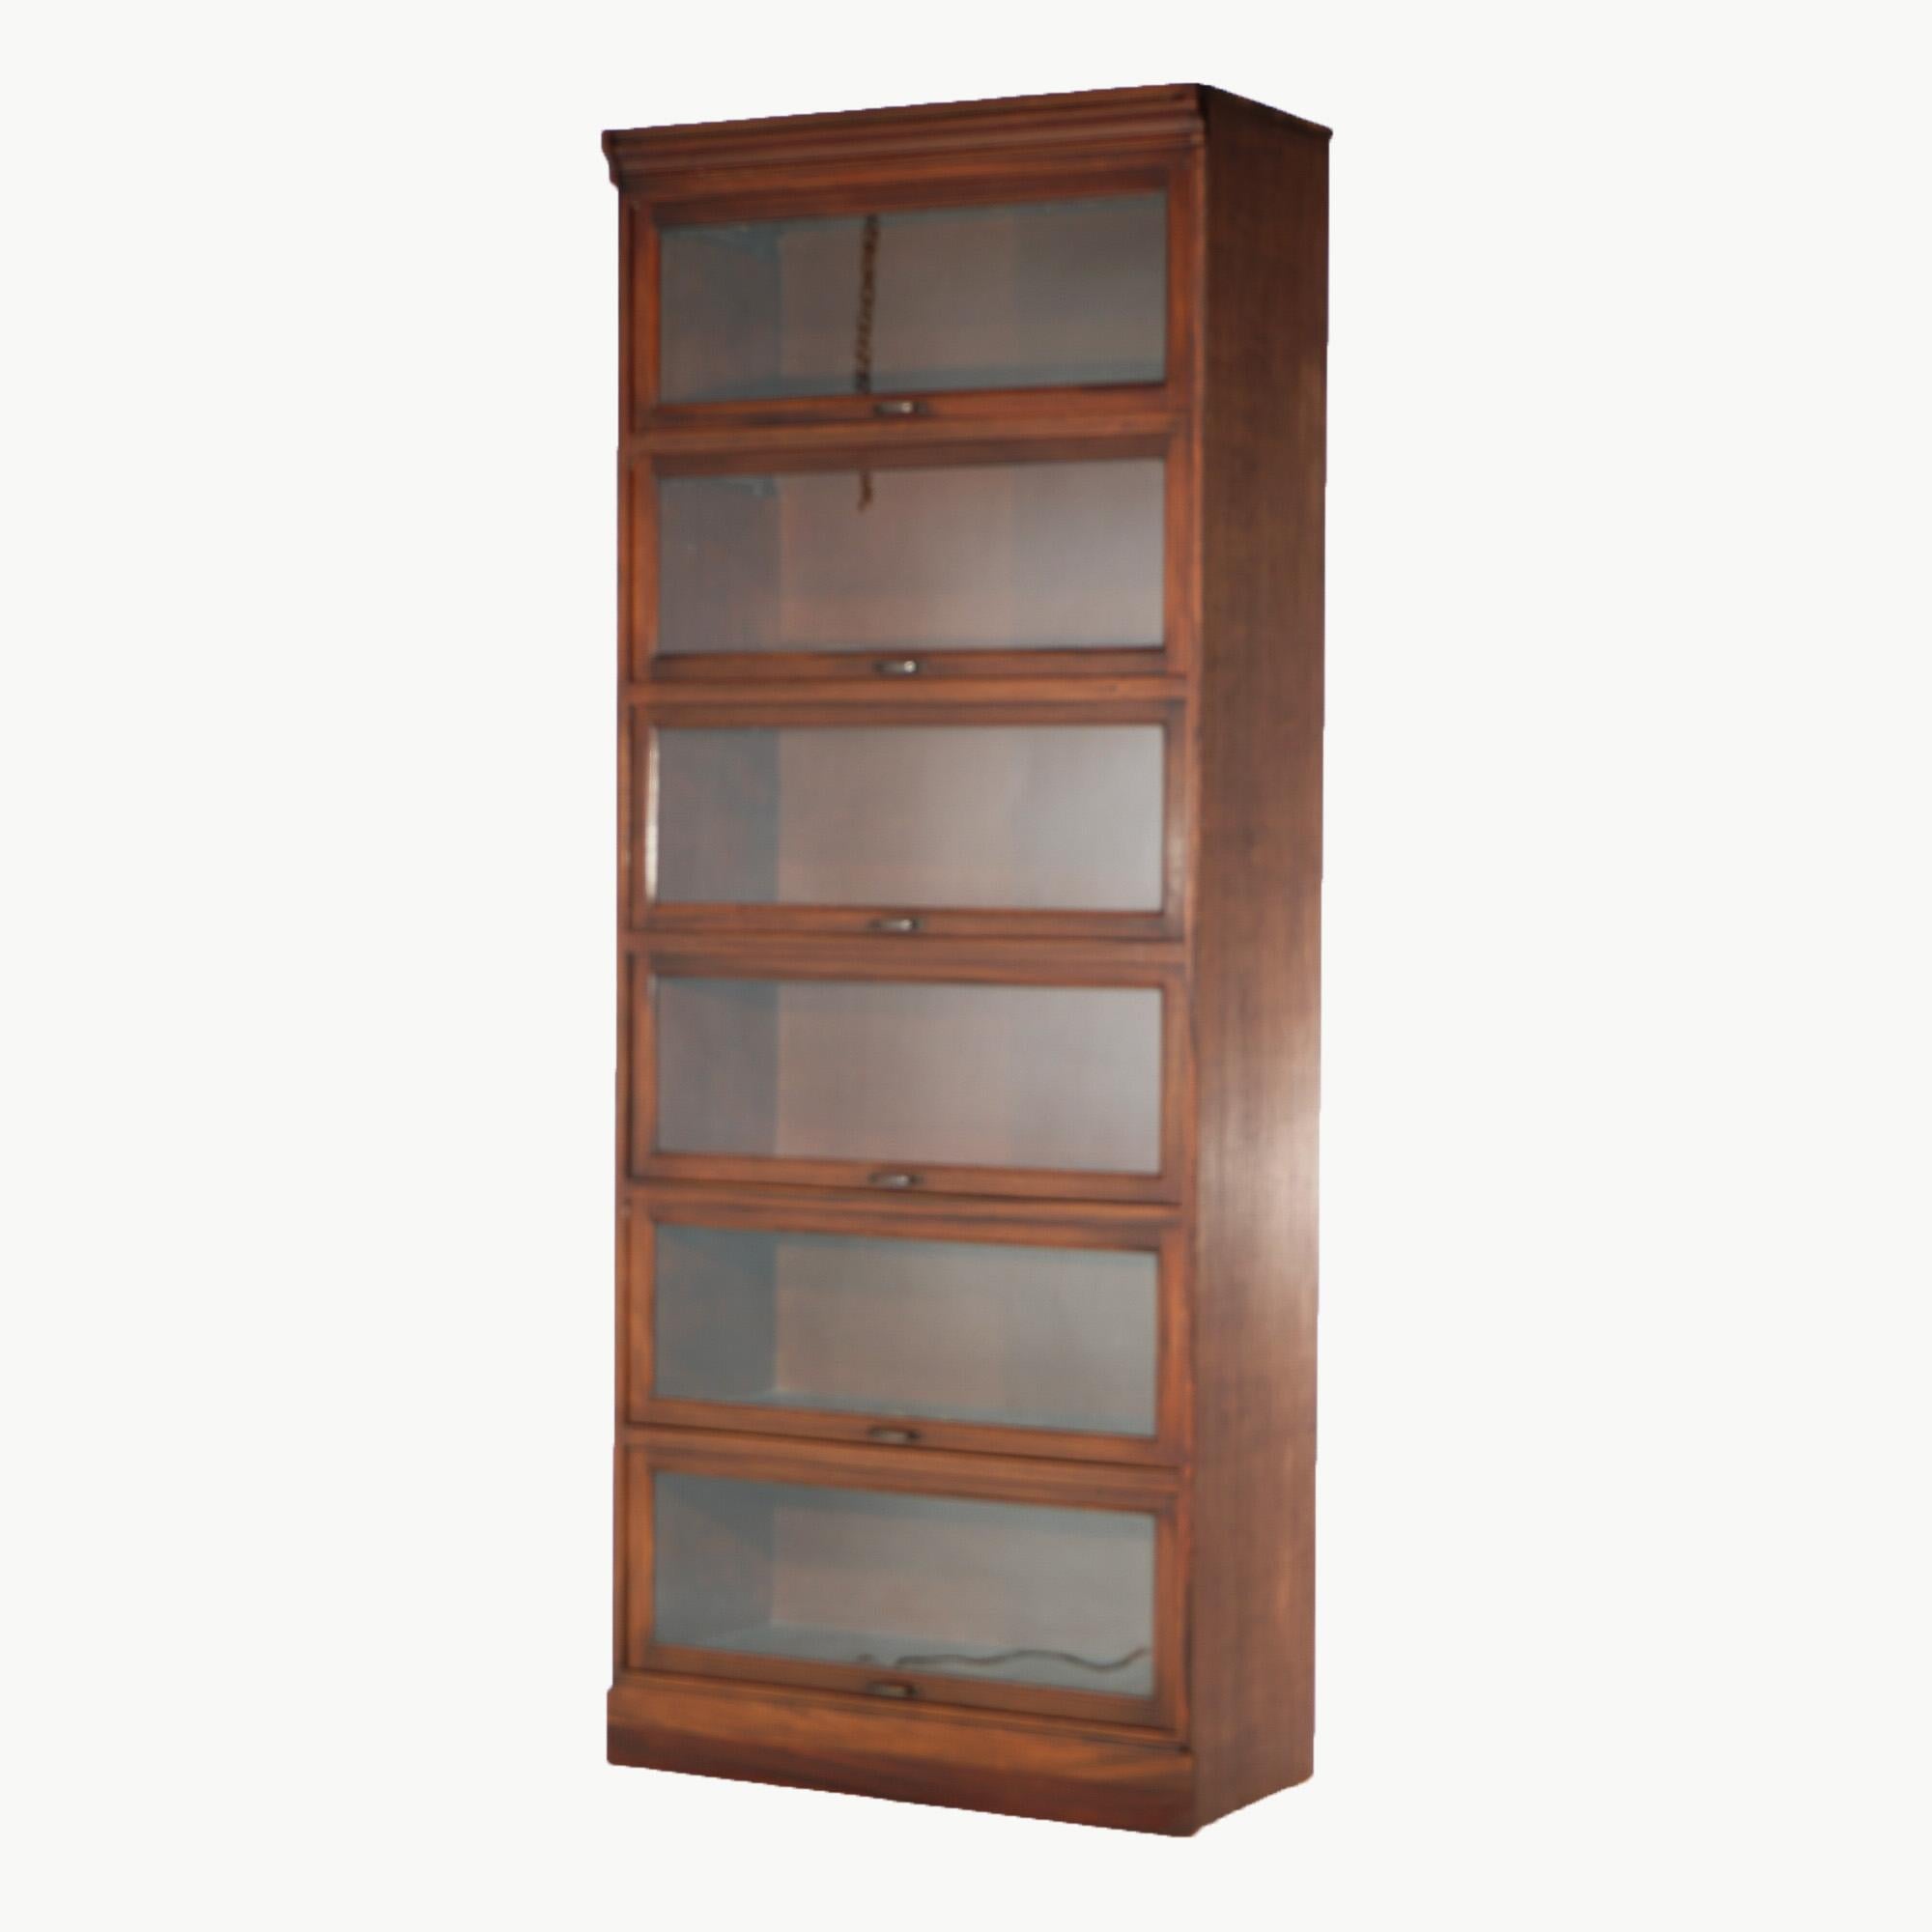 An Arts & Crafts Barrister style single unit bookcase offers mahogany construction with six sections, each having pull-out glass doors, 20th century

Measures - 90